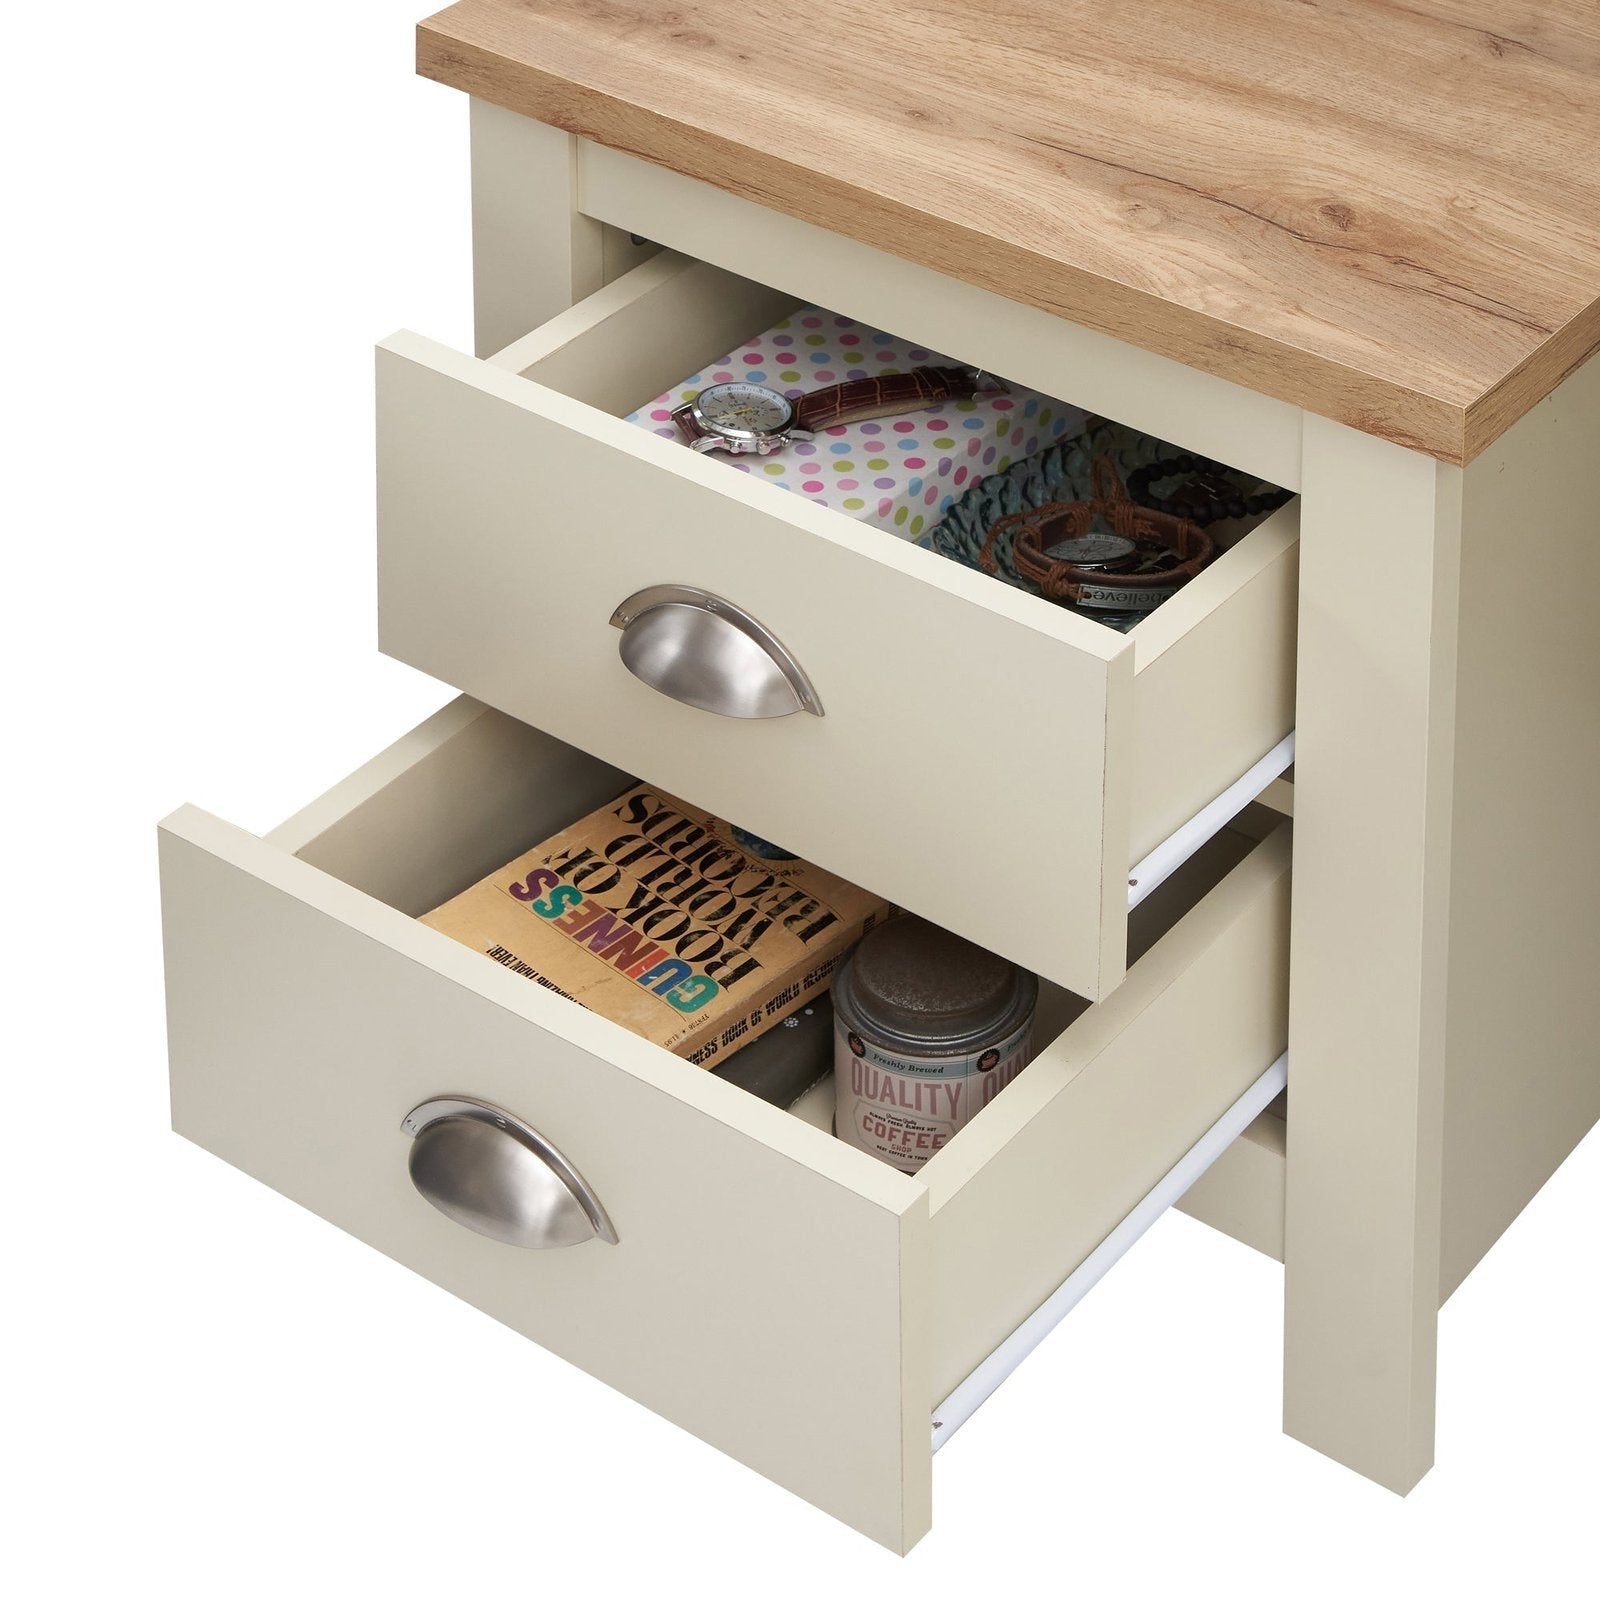 Lisbon Nightstand Drawers allhomely